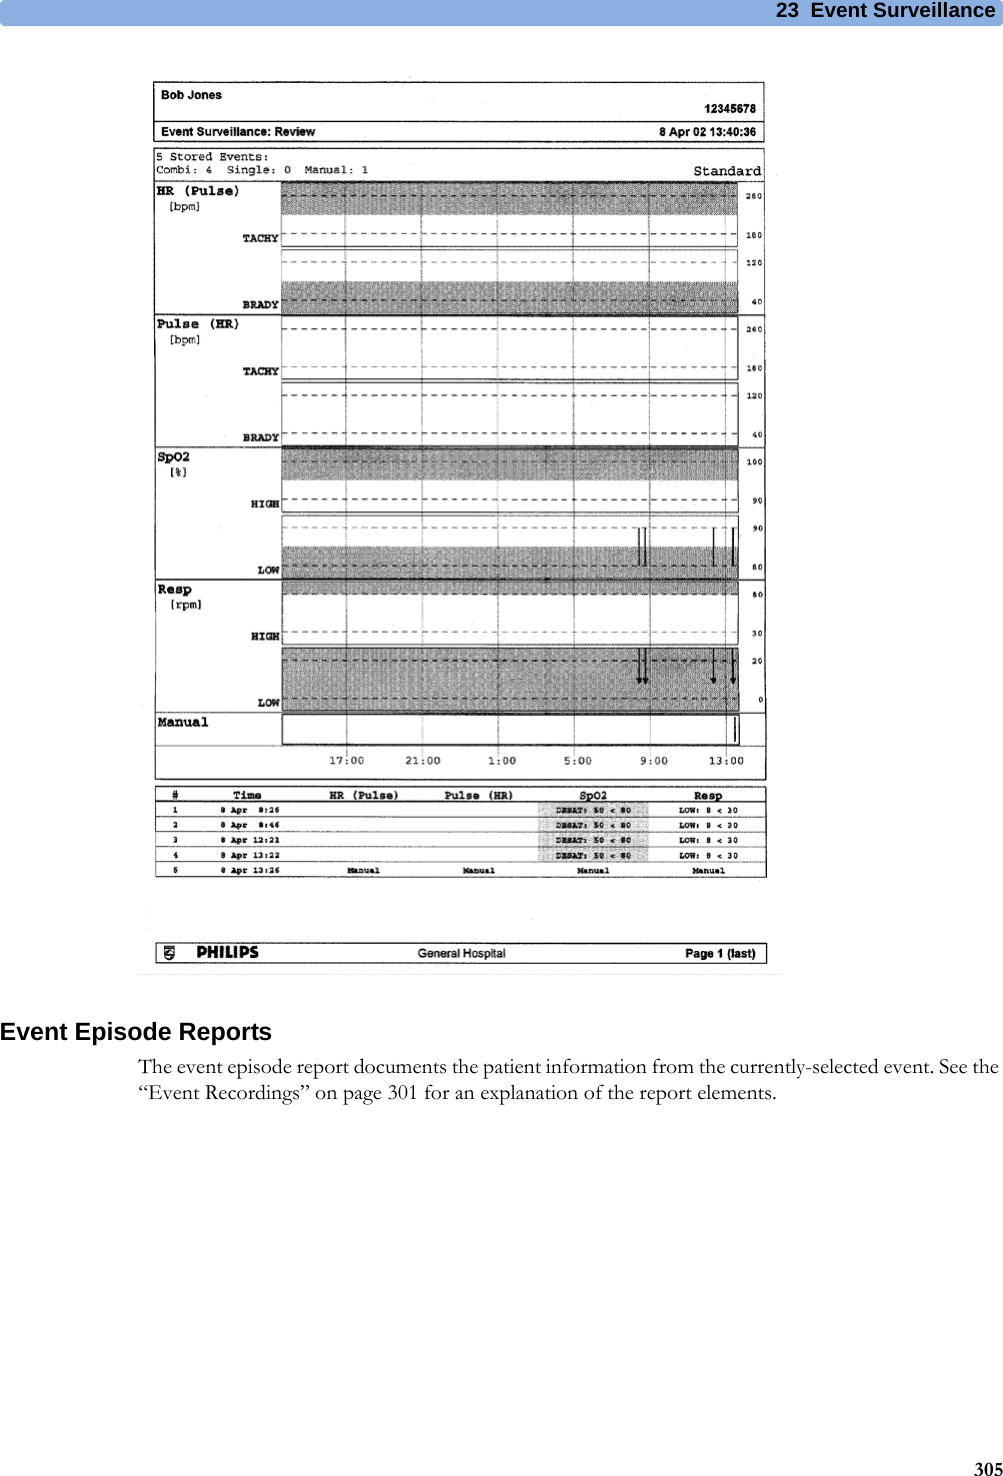 23 Event Surveillance305Event Episode ReportsThe event episode report documents the patient information from the currently-selected event. See the “Event Recordings” on page 301 for an explanation of the report elements.